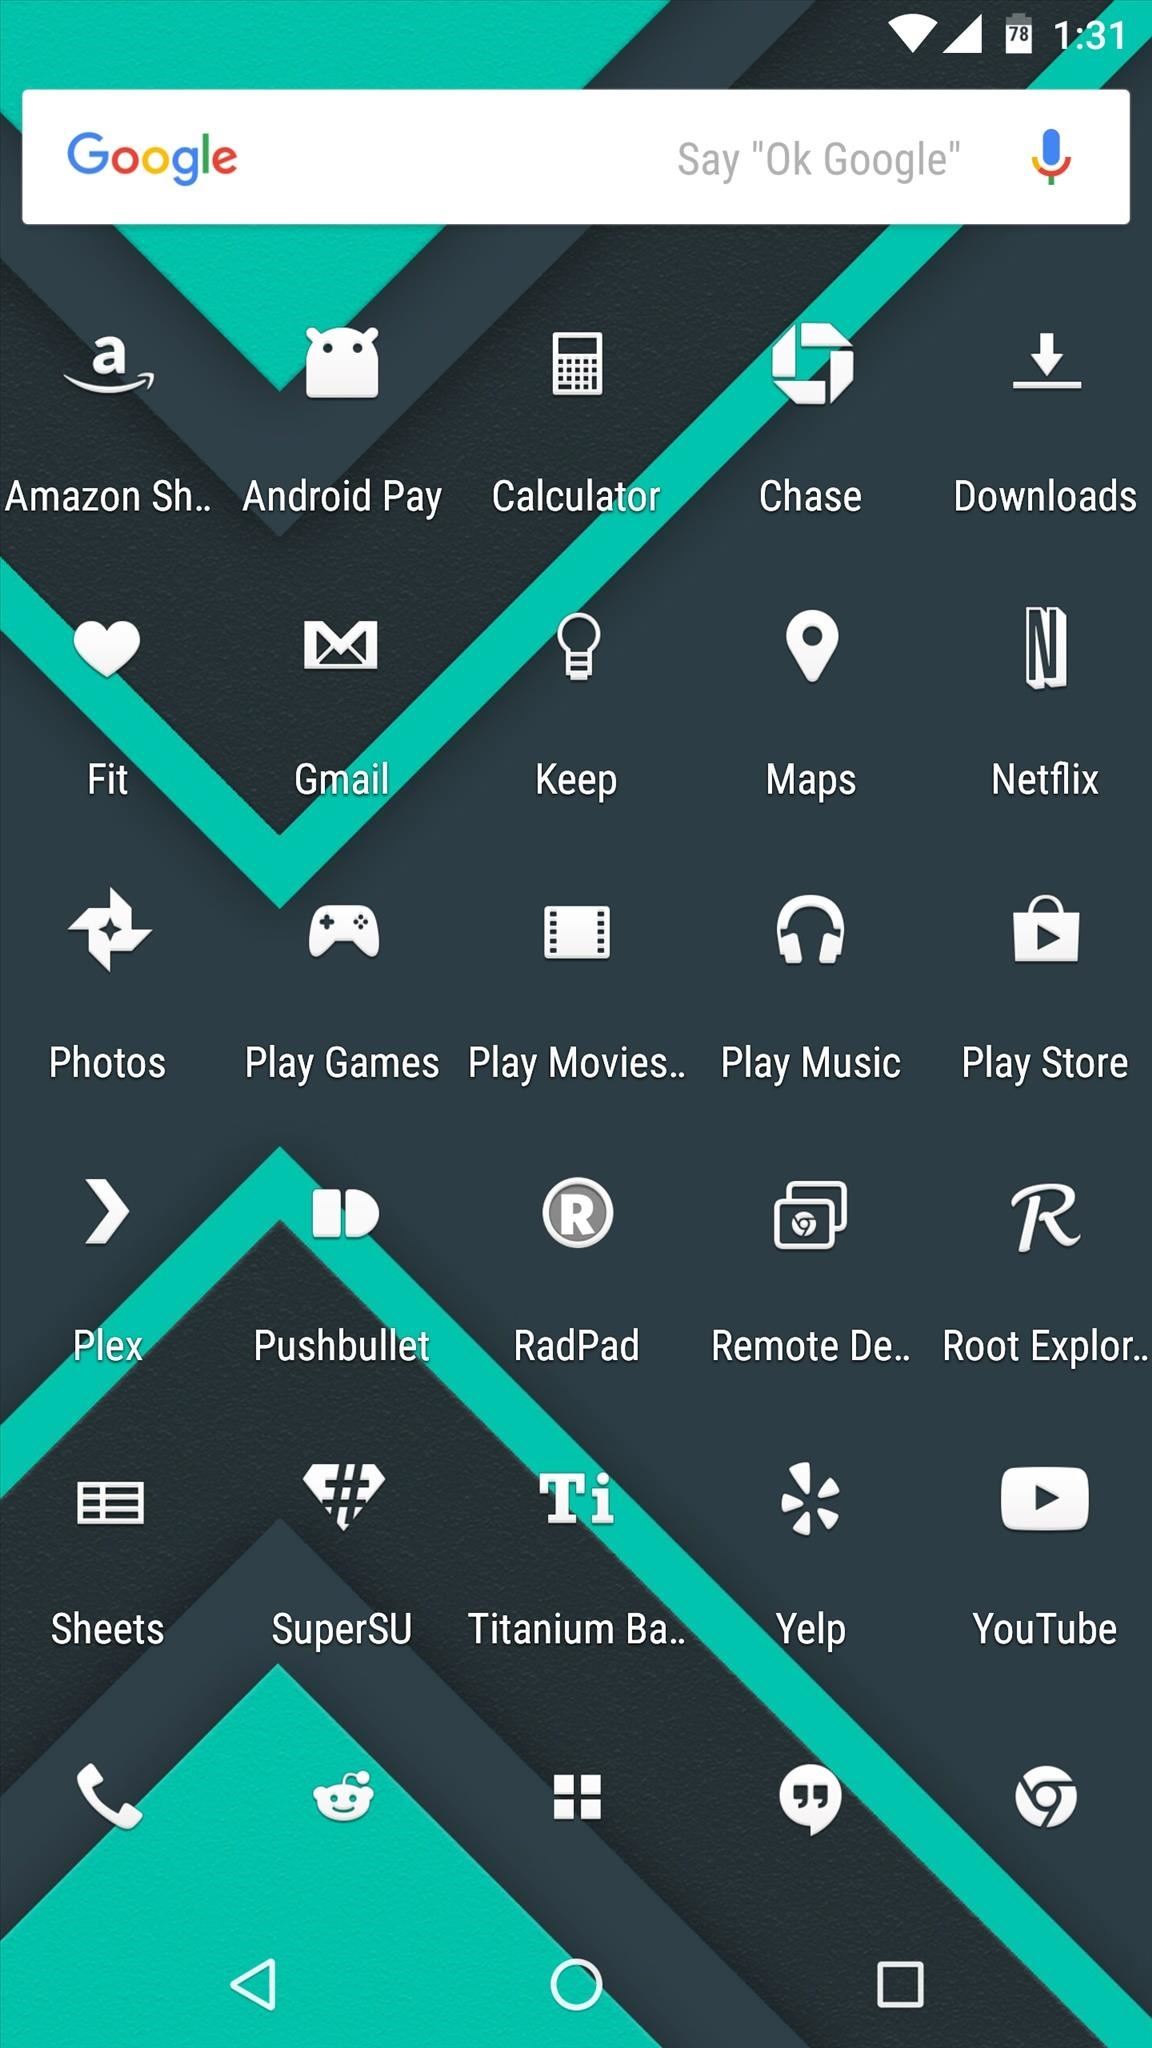 10 Free Icon Packs That'll Change the Look & Feel of Your Android